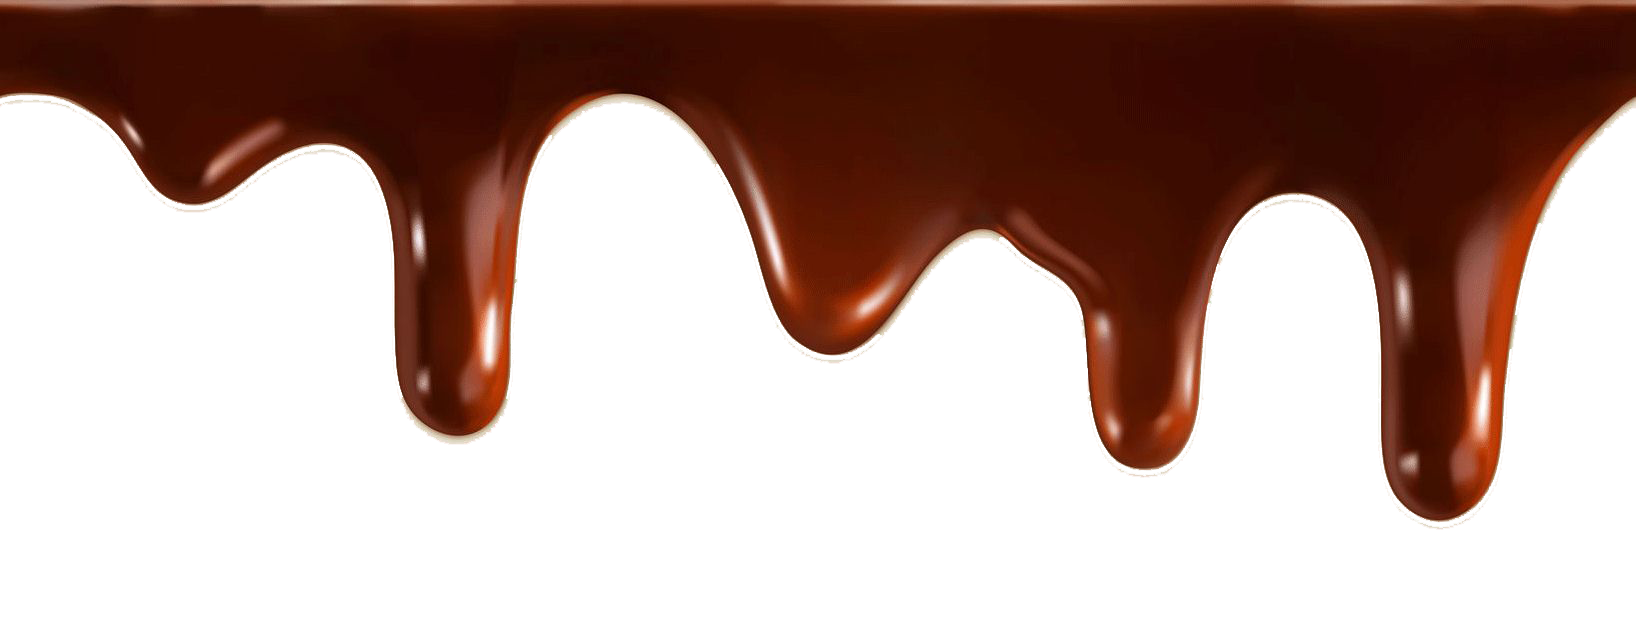 Chocolate PNG-PlusPNG.com-280